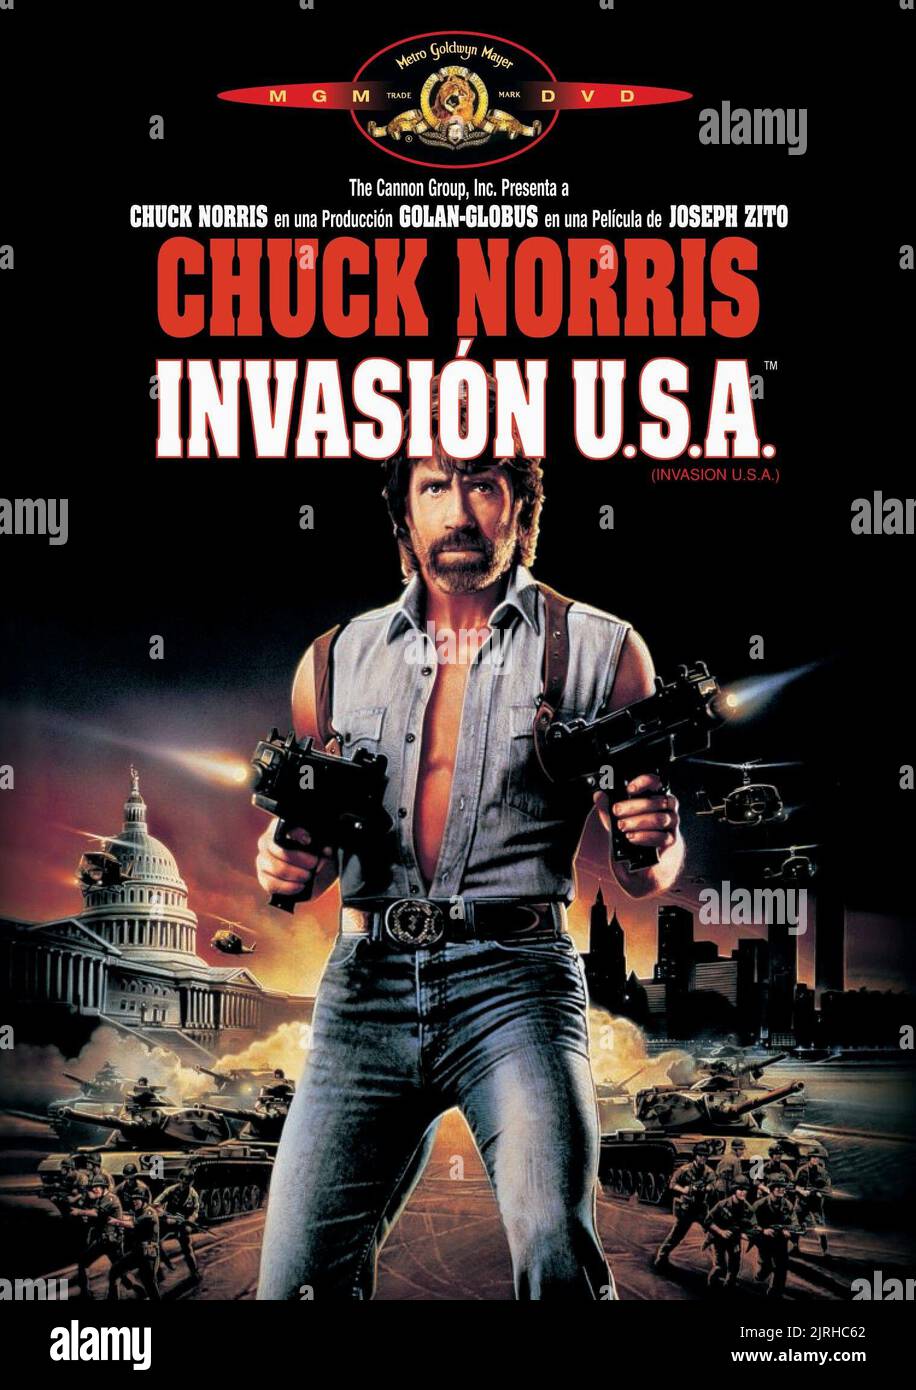 CHUCK NORRIS POSTER, INVASION U.S.A, 1985 Stock Photo